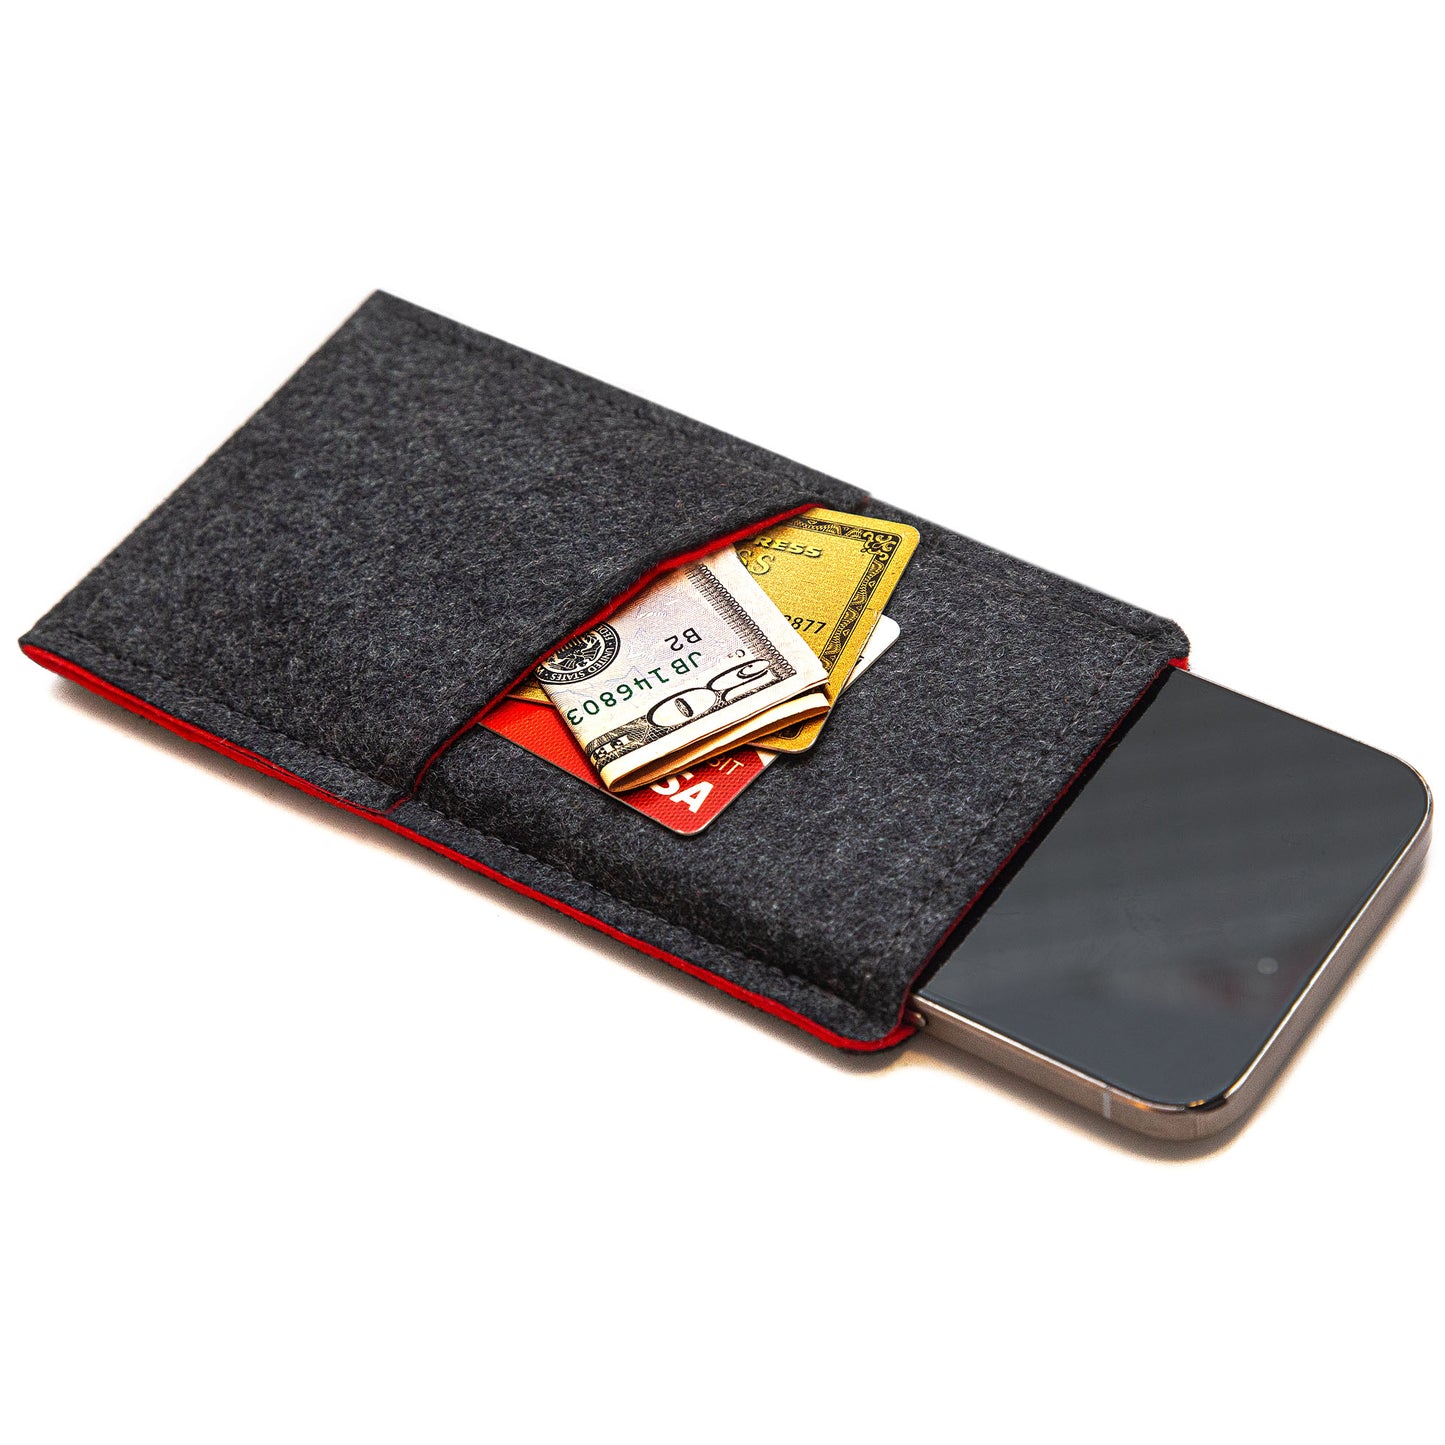 Premium Felt iPhone Sleeve with Card Pocket - Charcoal Gray & Red